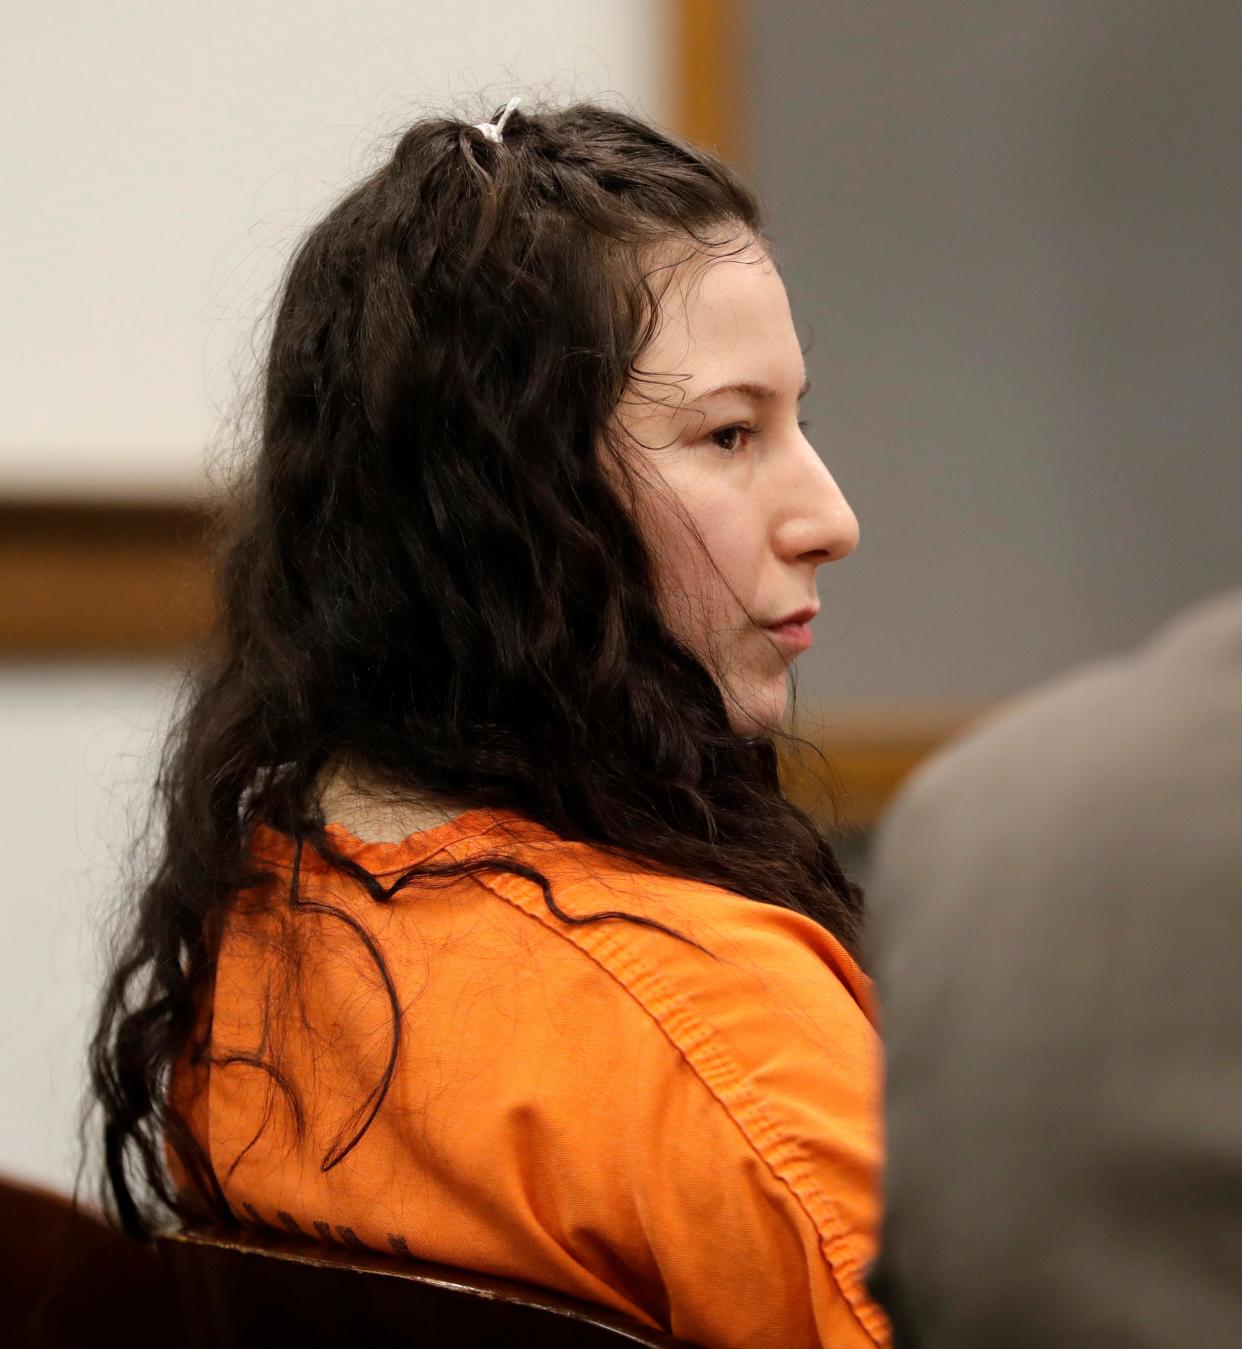 Taylor Schabusiness, who is charged with first-degree intentional homicide, third-degree sexual assault and mutilating a corpse, appears in court for a competency hearing on Jan. 6 in Green Bay. Her trial is scheduled to being July 21 with jury selection after a judge ruled her competent on Friday.